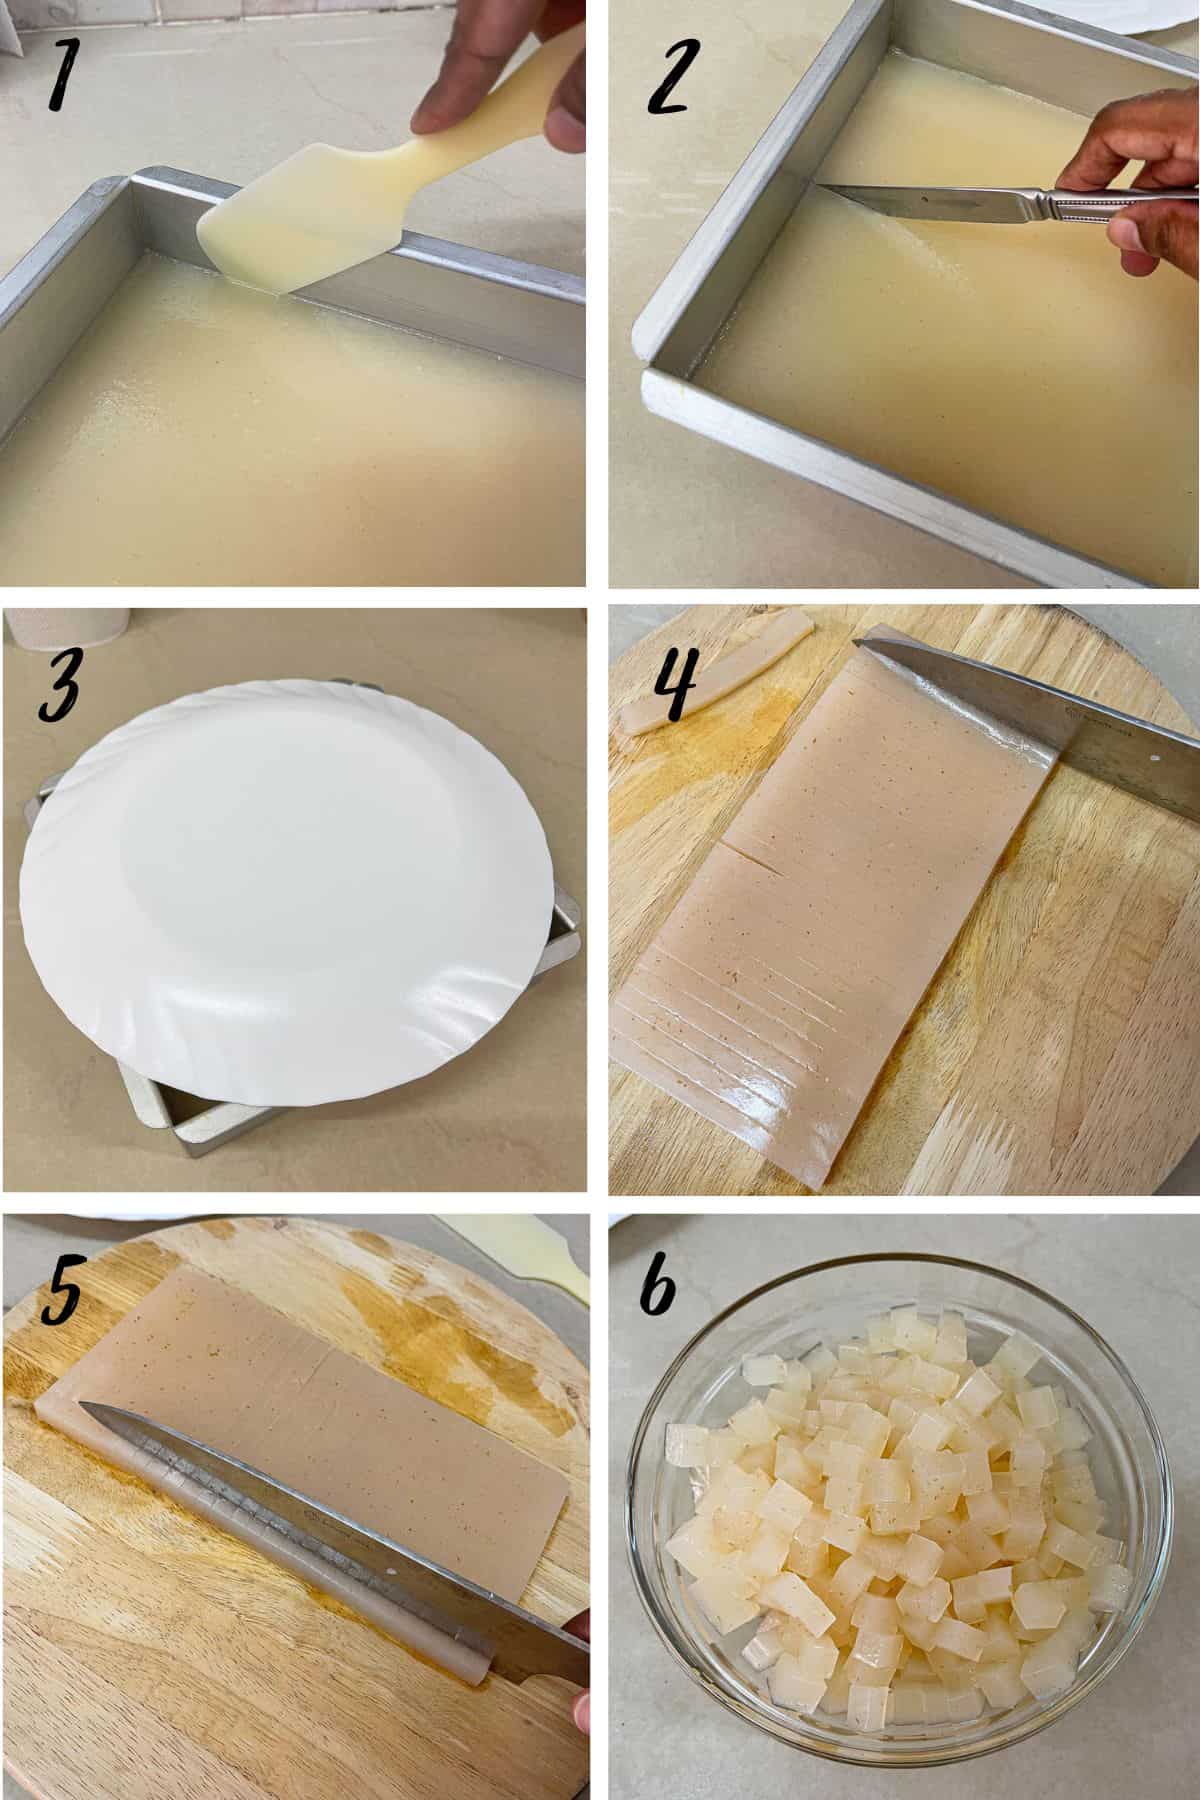 A poster of 6 images showing how to cut jelly into boba.